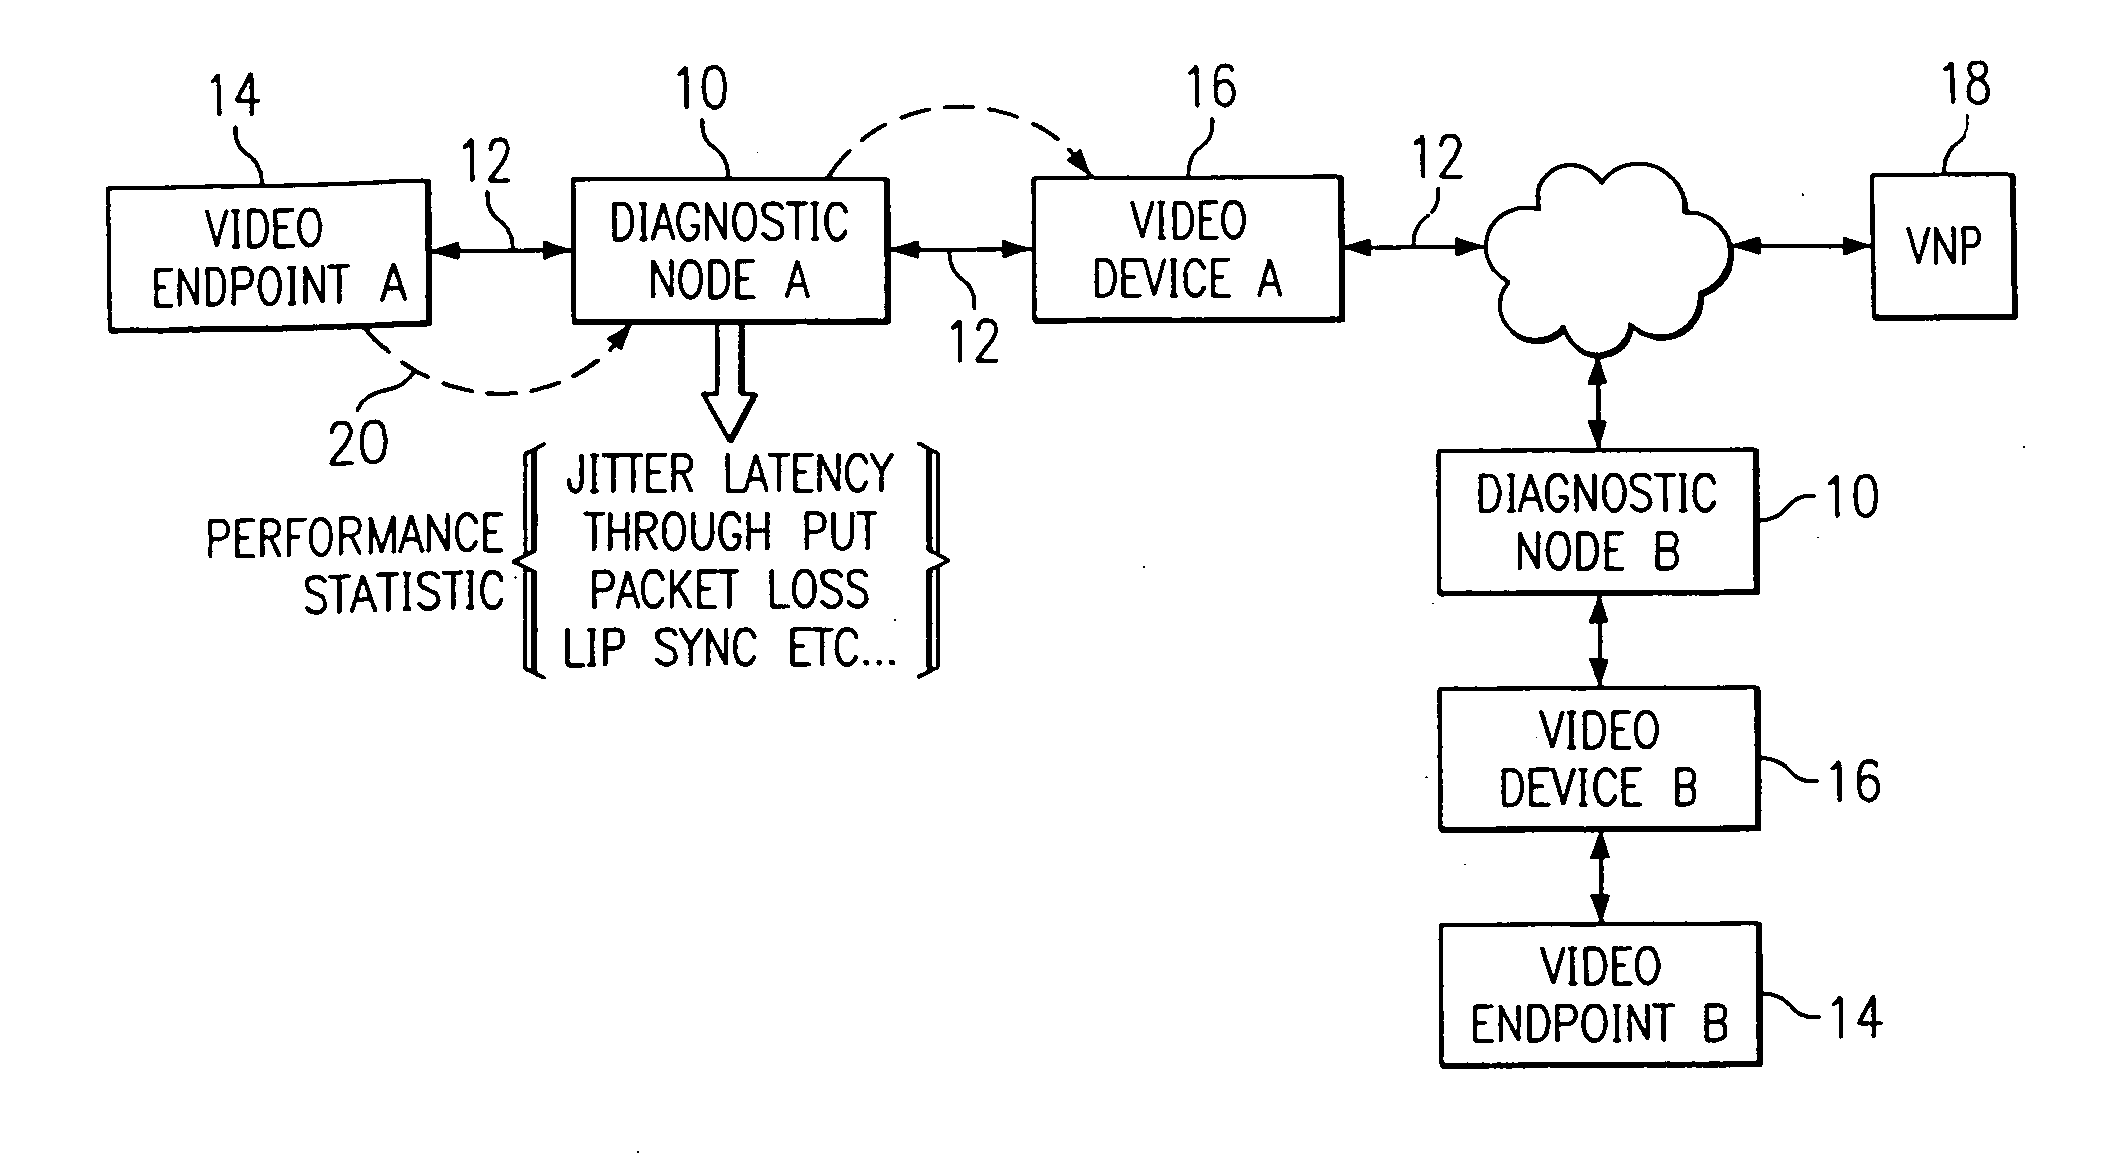 System and method for monitoring and diagnosis of video network performance